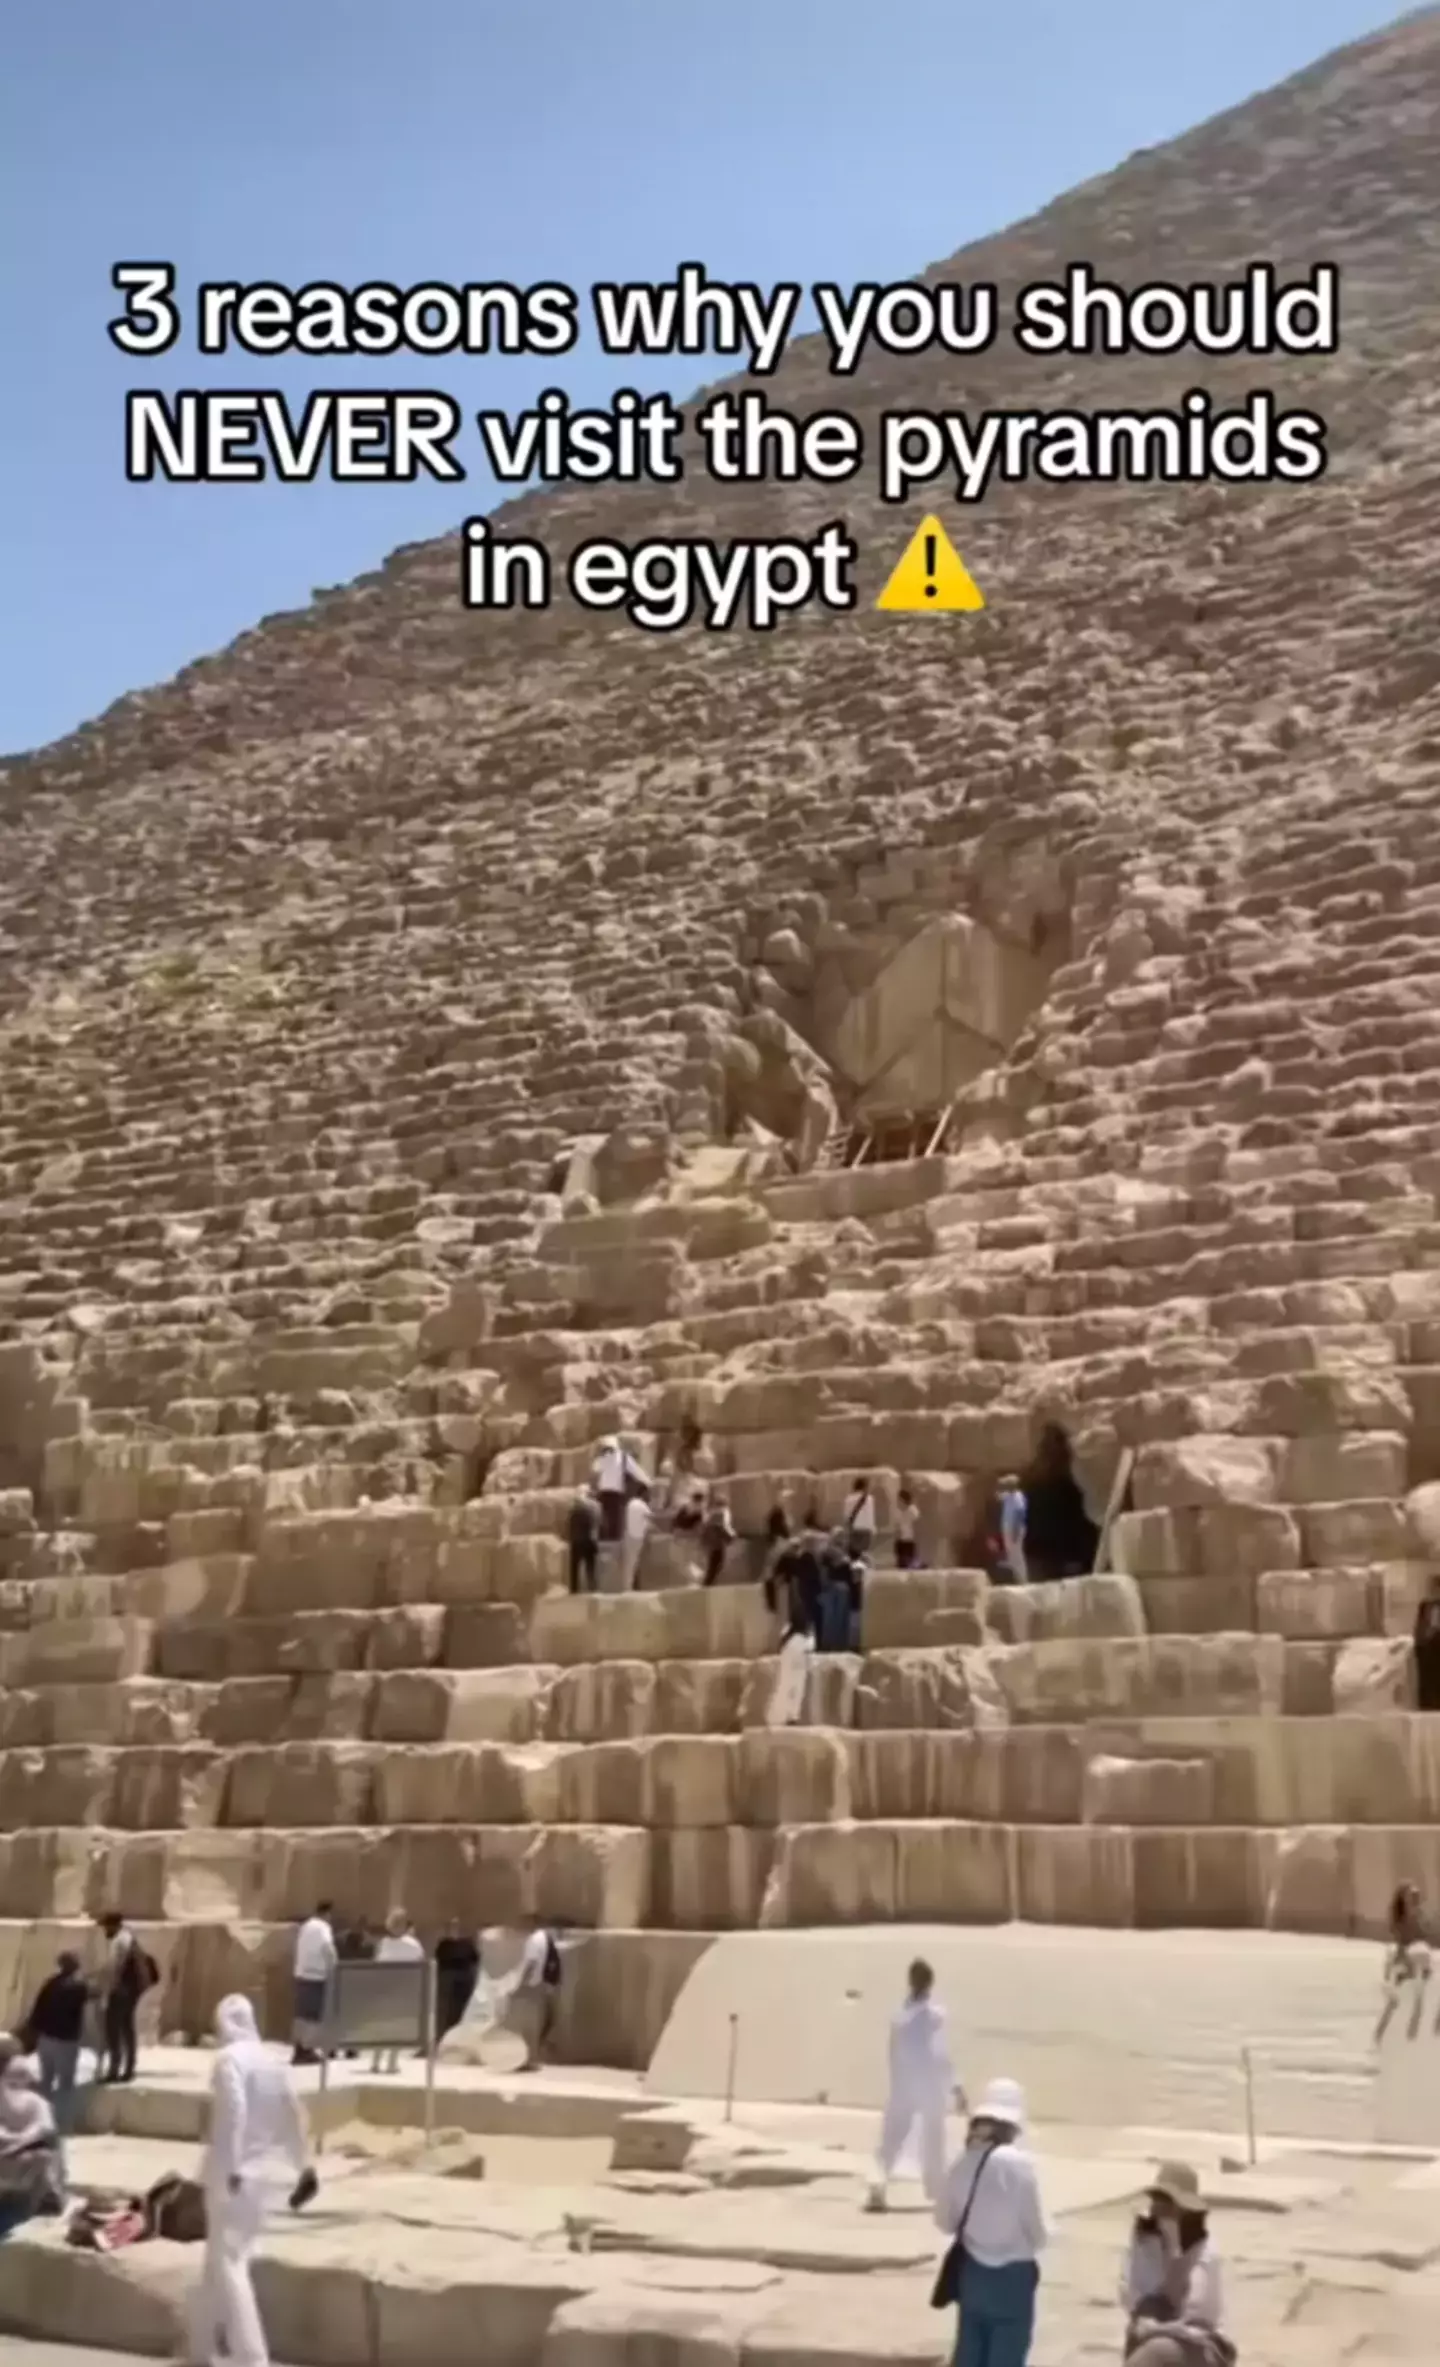 One tourist spoke about their experience of the pyramids.